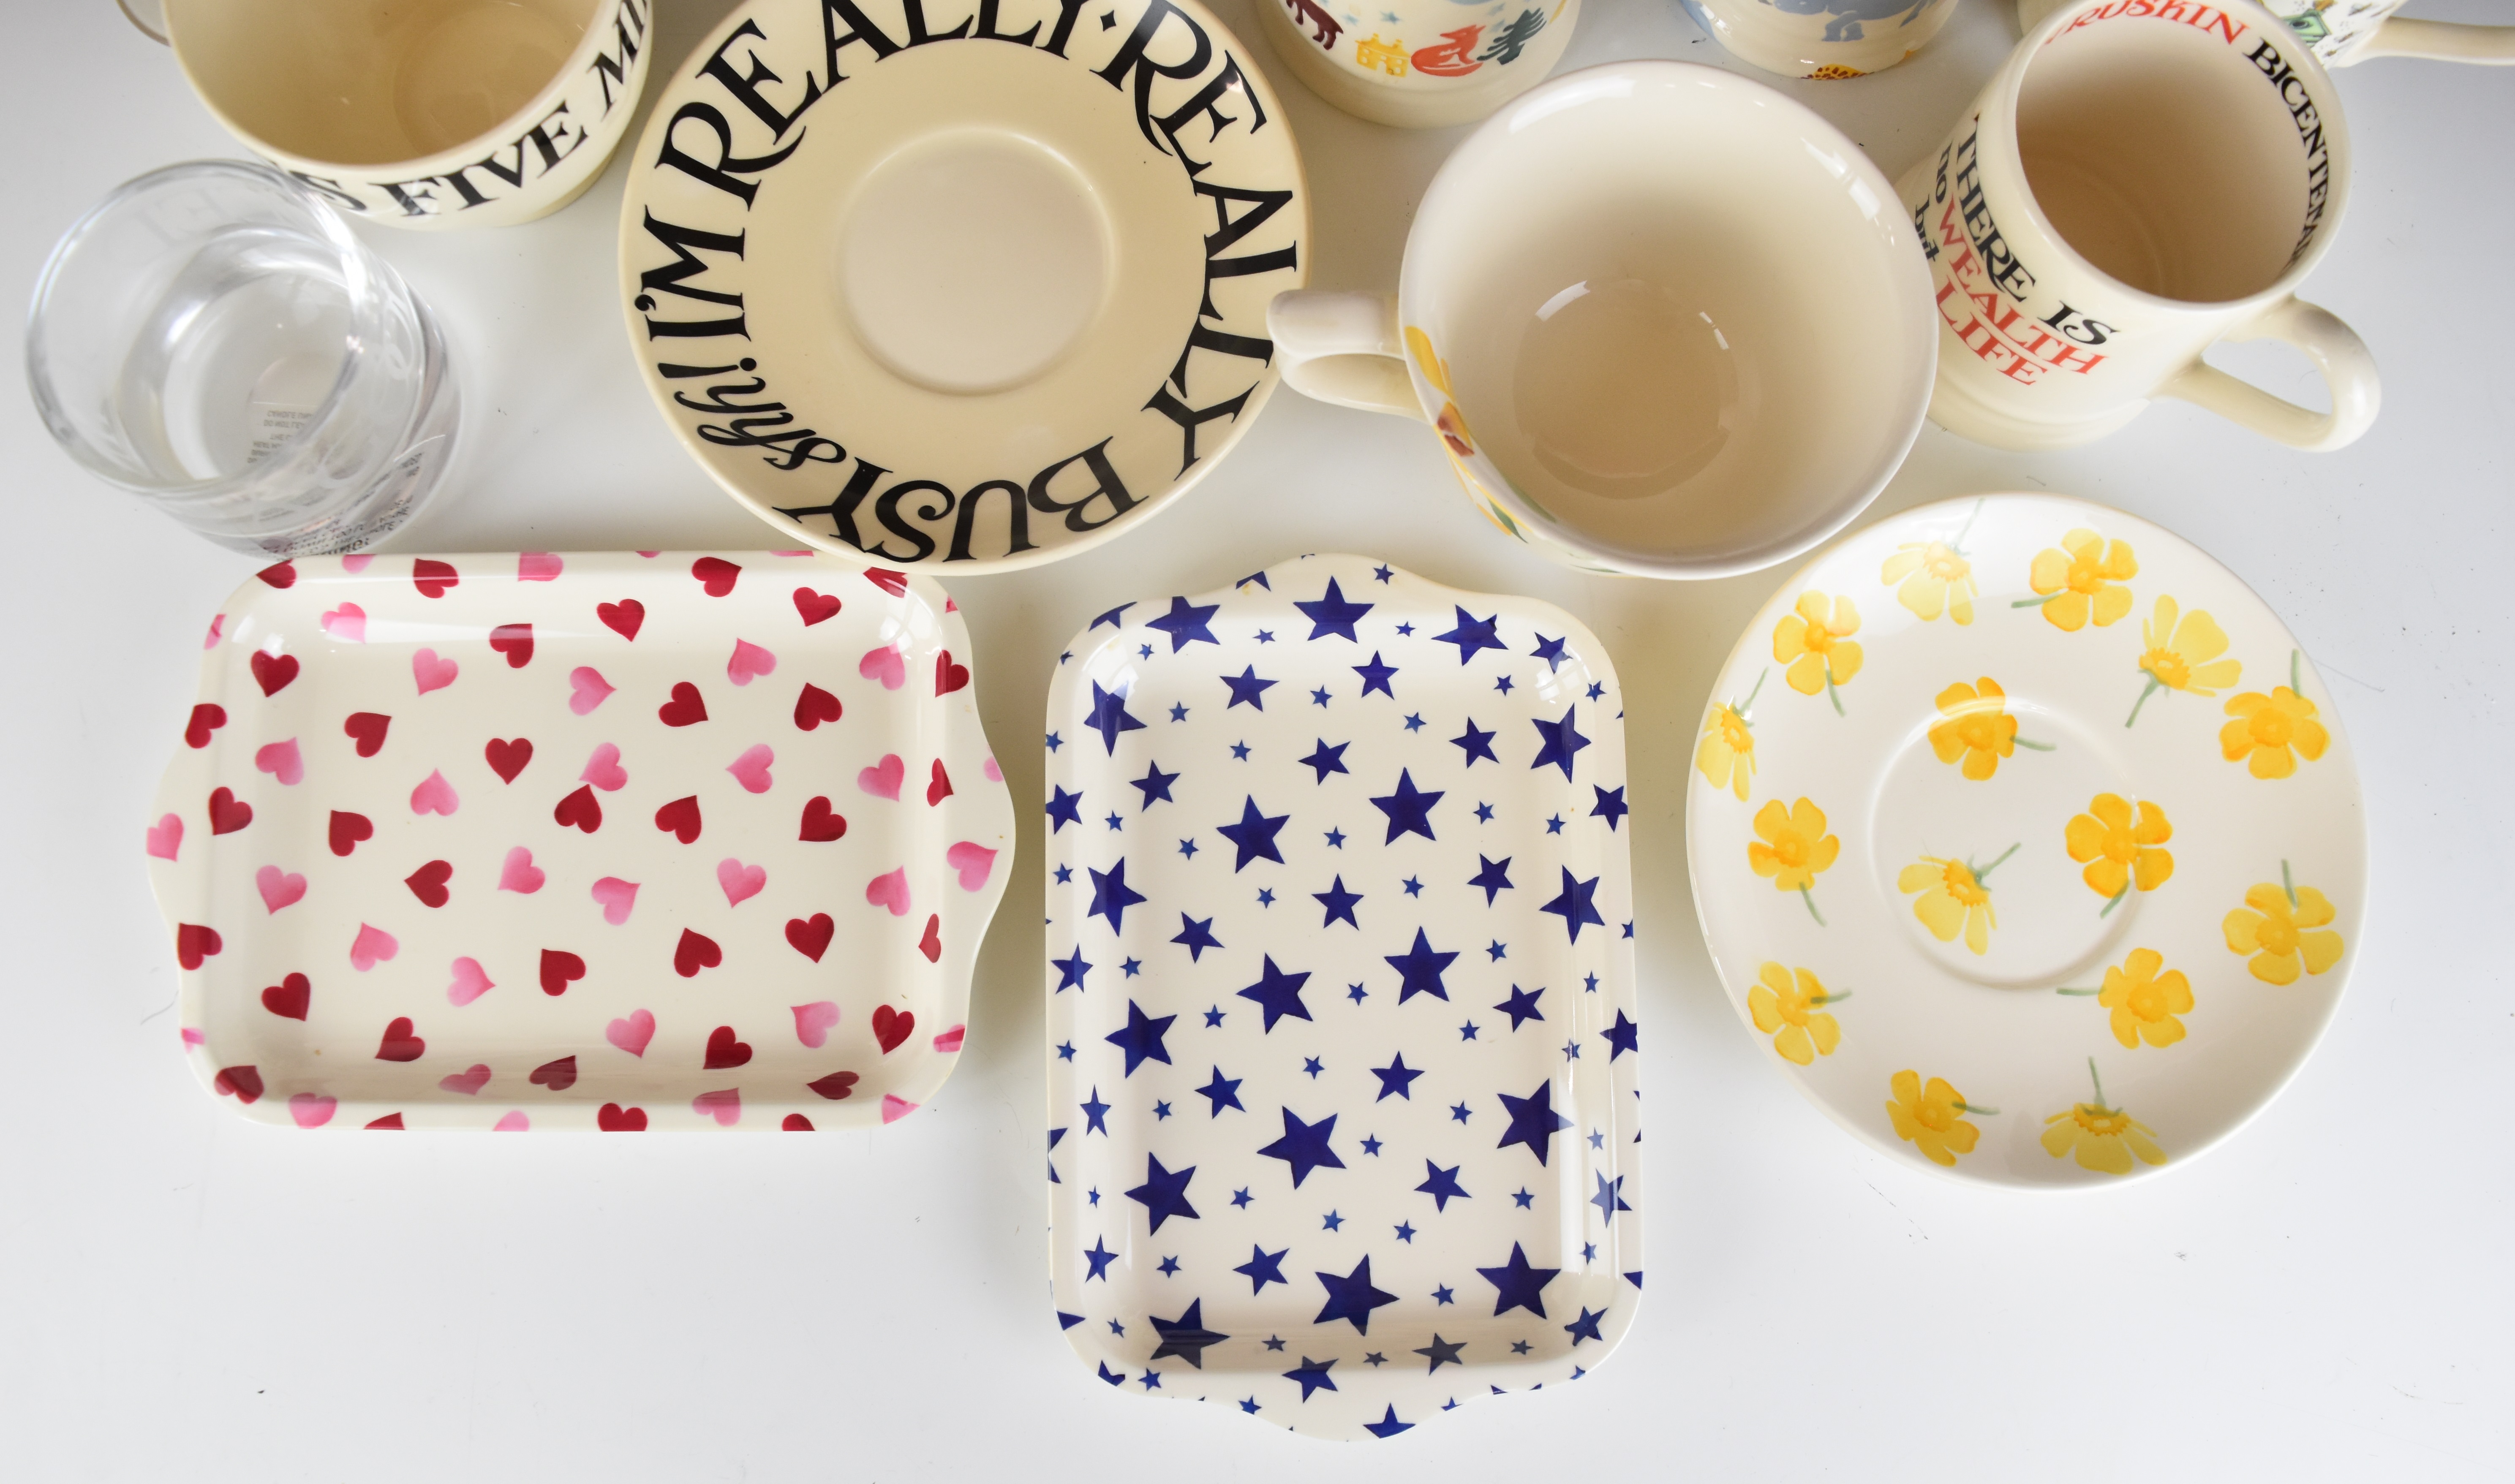 Emma Bridgewater ceramics including a tazza with pansy decoration, mugs, cups and saucers, glasses - Image 2 of 18